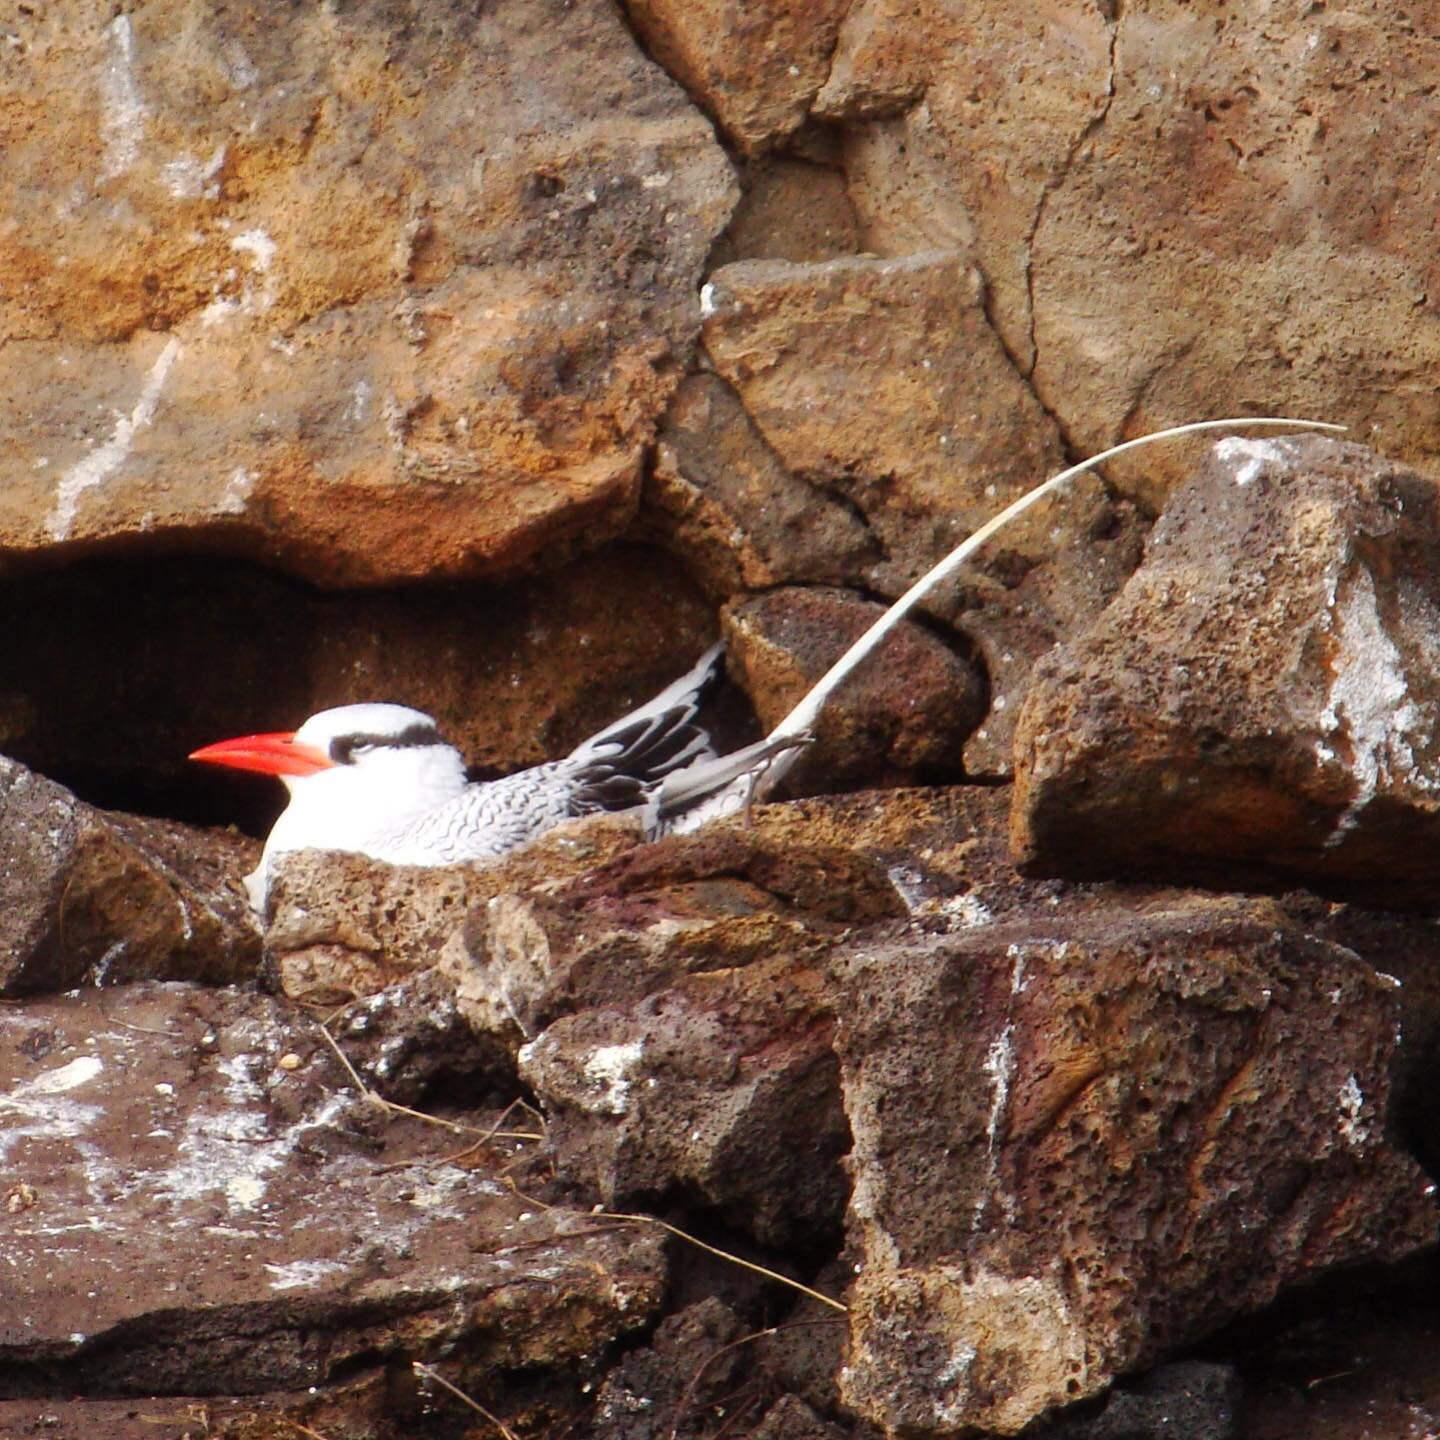 The Red-billed Tropicbird can be found nesting in cracks and holes in cliffs throughout the islands. 
#galapagos #wildlife #birdphotography #birdsofinstagram #integritygalapagos #luxurycruise 

Photo courtesy of INTEGRITY Naturalist Patricia Stucki